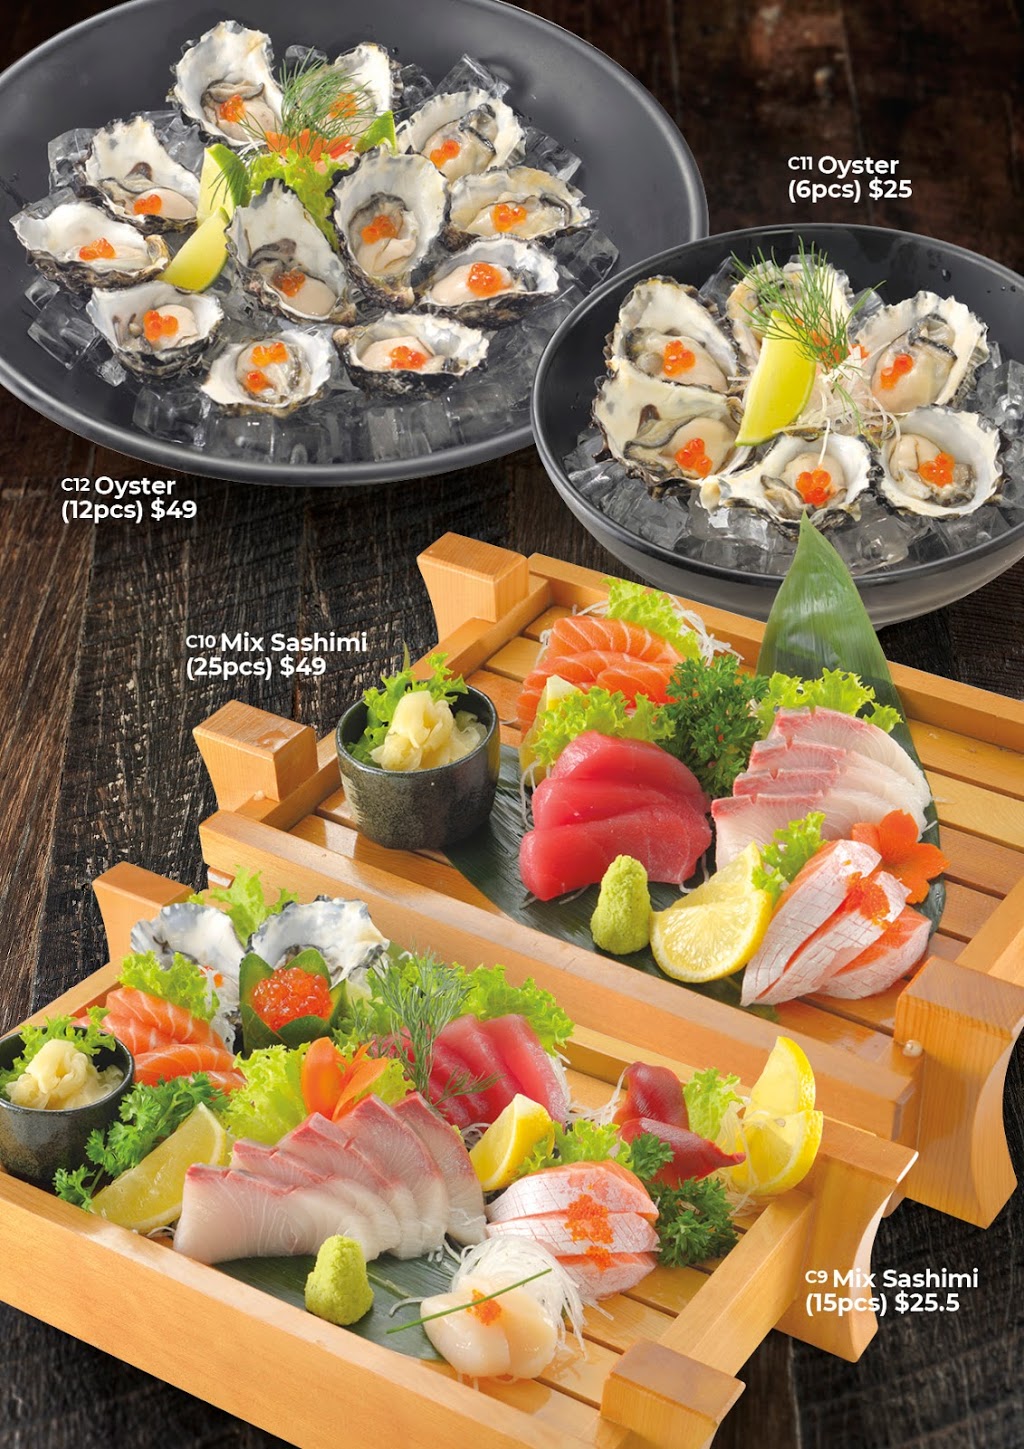 Eat Sushi Cammeray(Catering) | restaurant | Shop 002 , Stockland Cammeray, 450 Miller Street, Cammeray NSW 2062, Australia | 0424508879 OR +61 424 508 879